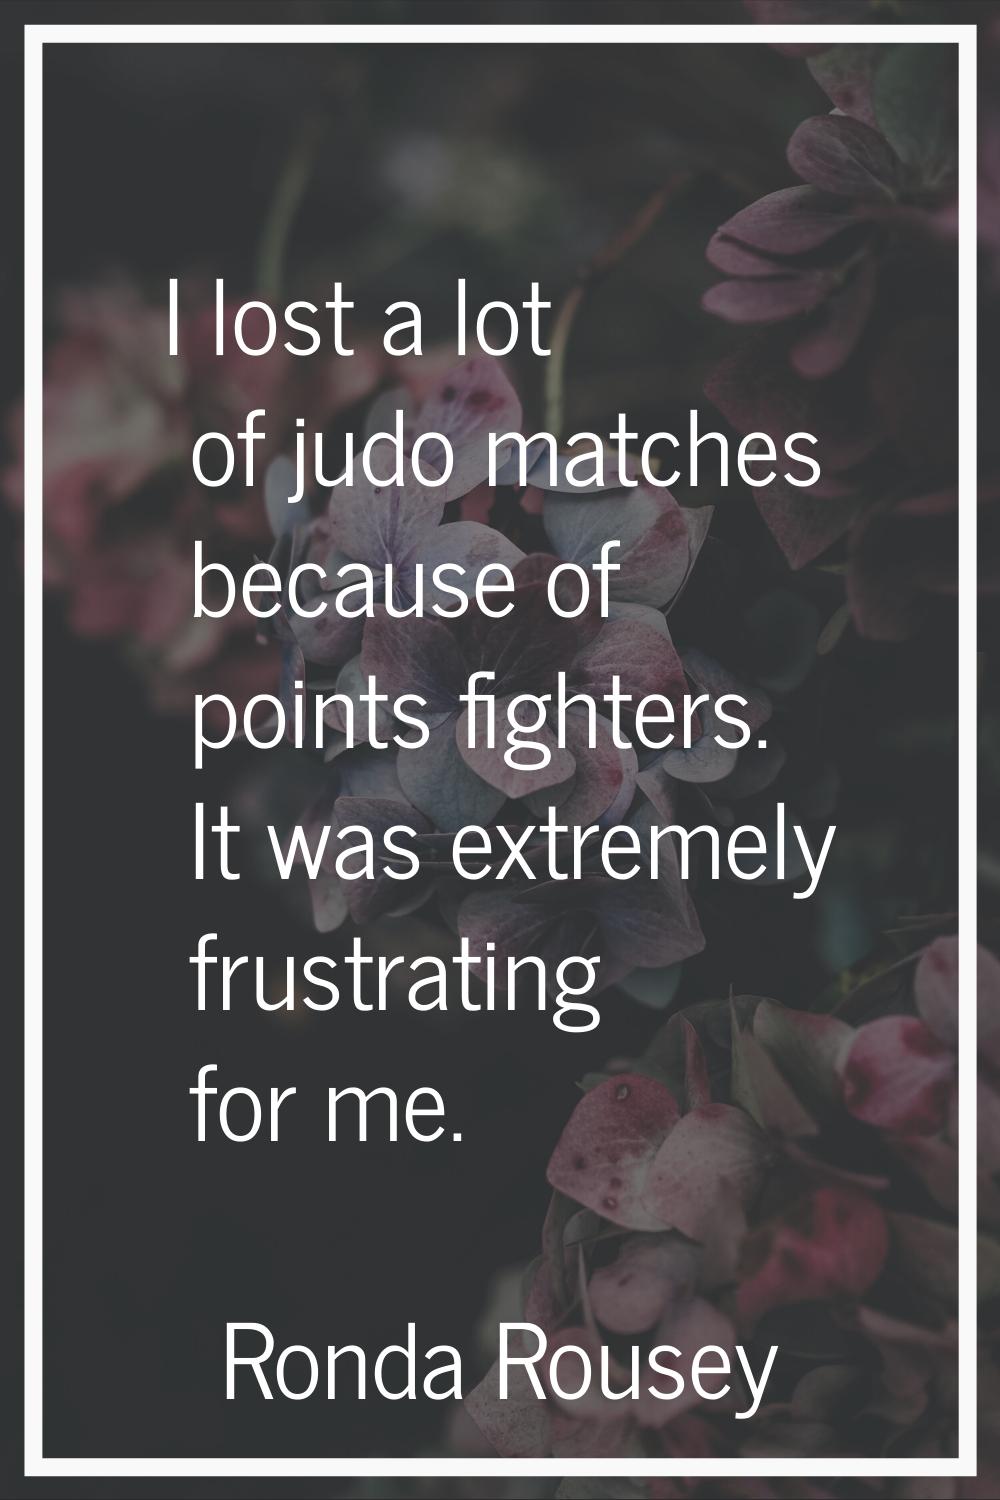 I lost a lot of judo matches because of points fighters. It was extremely frustrating for me.